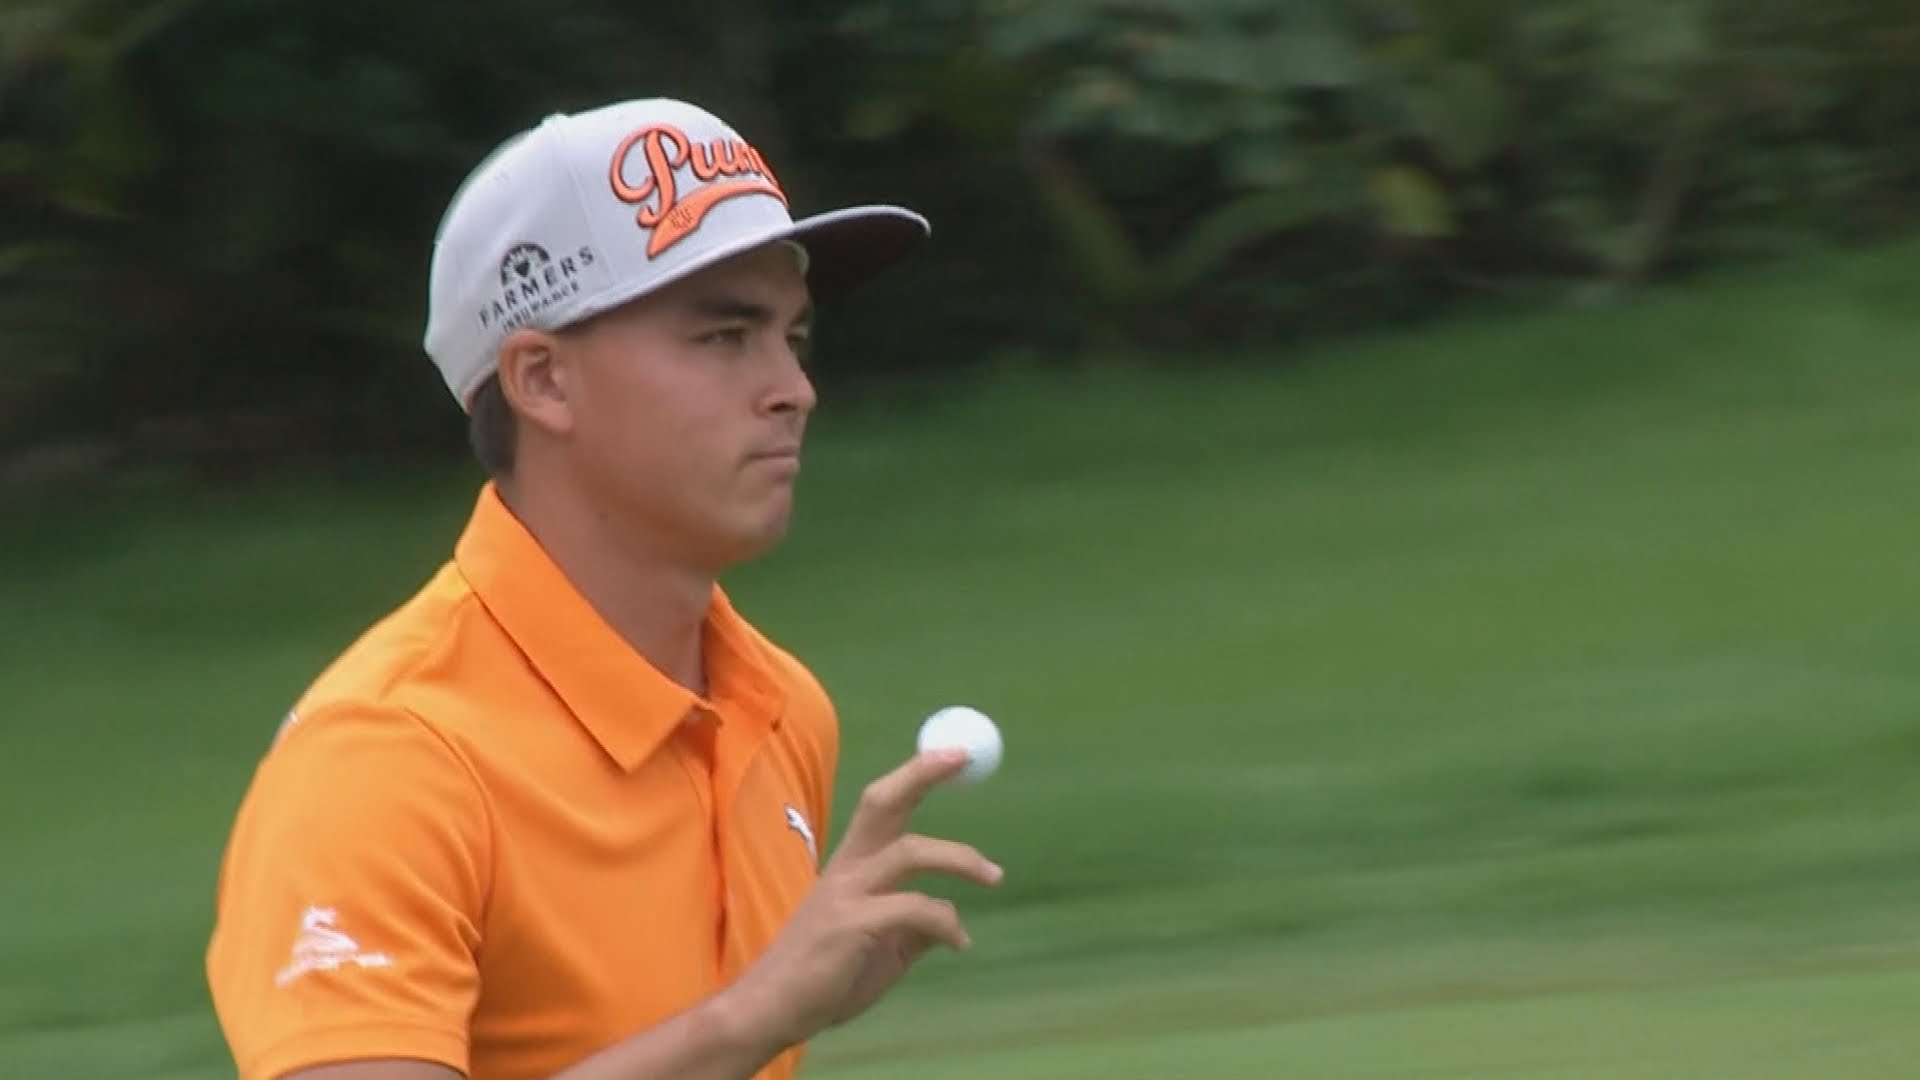 Rickie Fowler holes a 32-foot putt for birdie at HSBC - YouTube